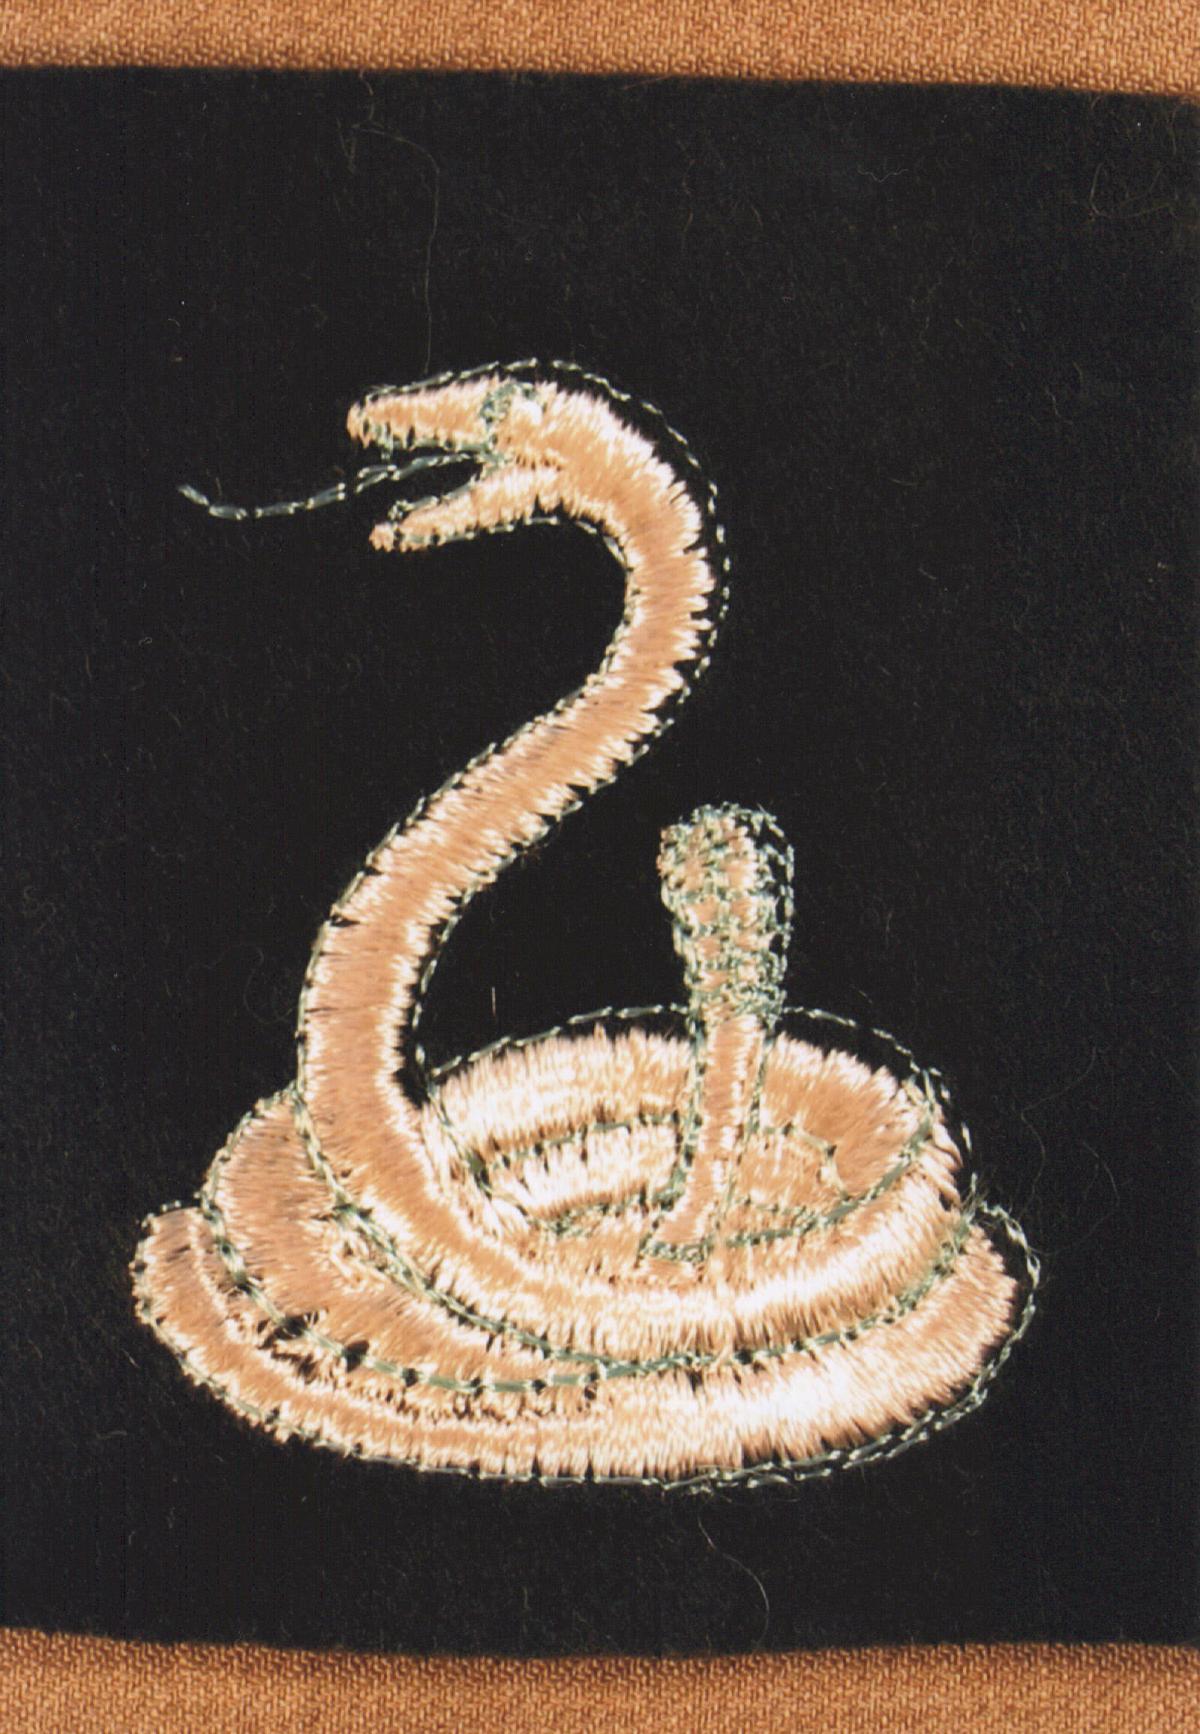 Embroidered patch showing a coiled snake with its tongue extended on a black background